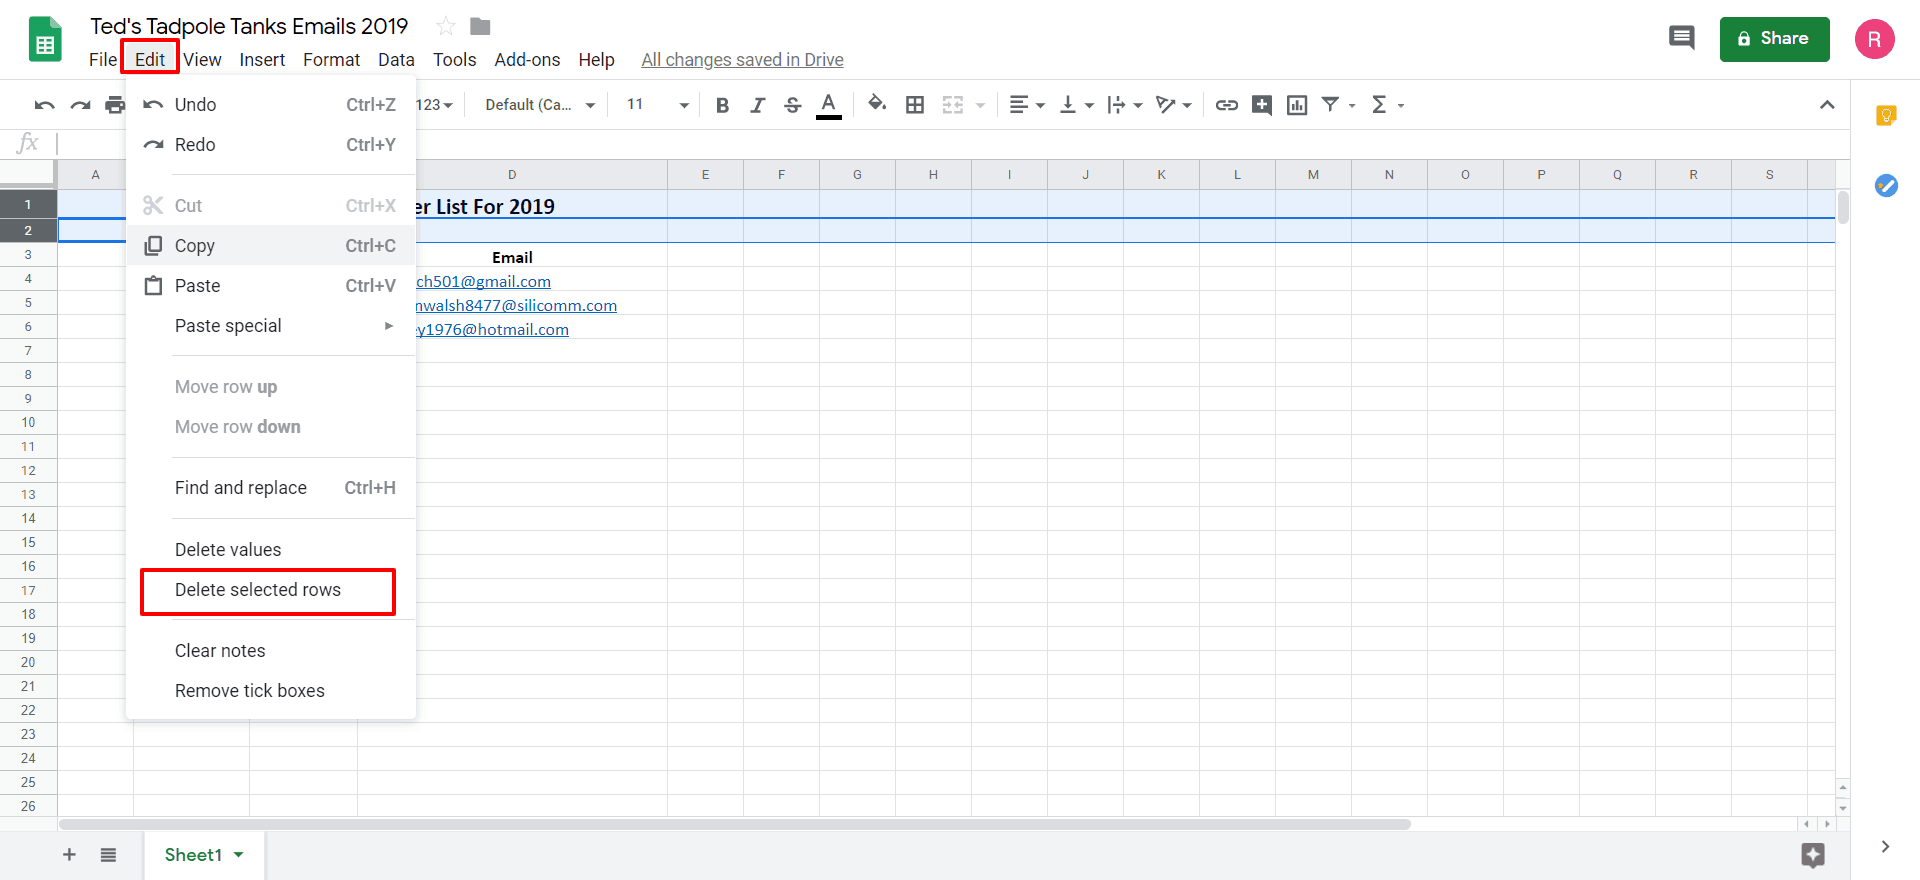 shows the Edit menu in GSheets